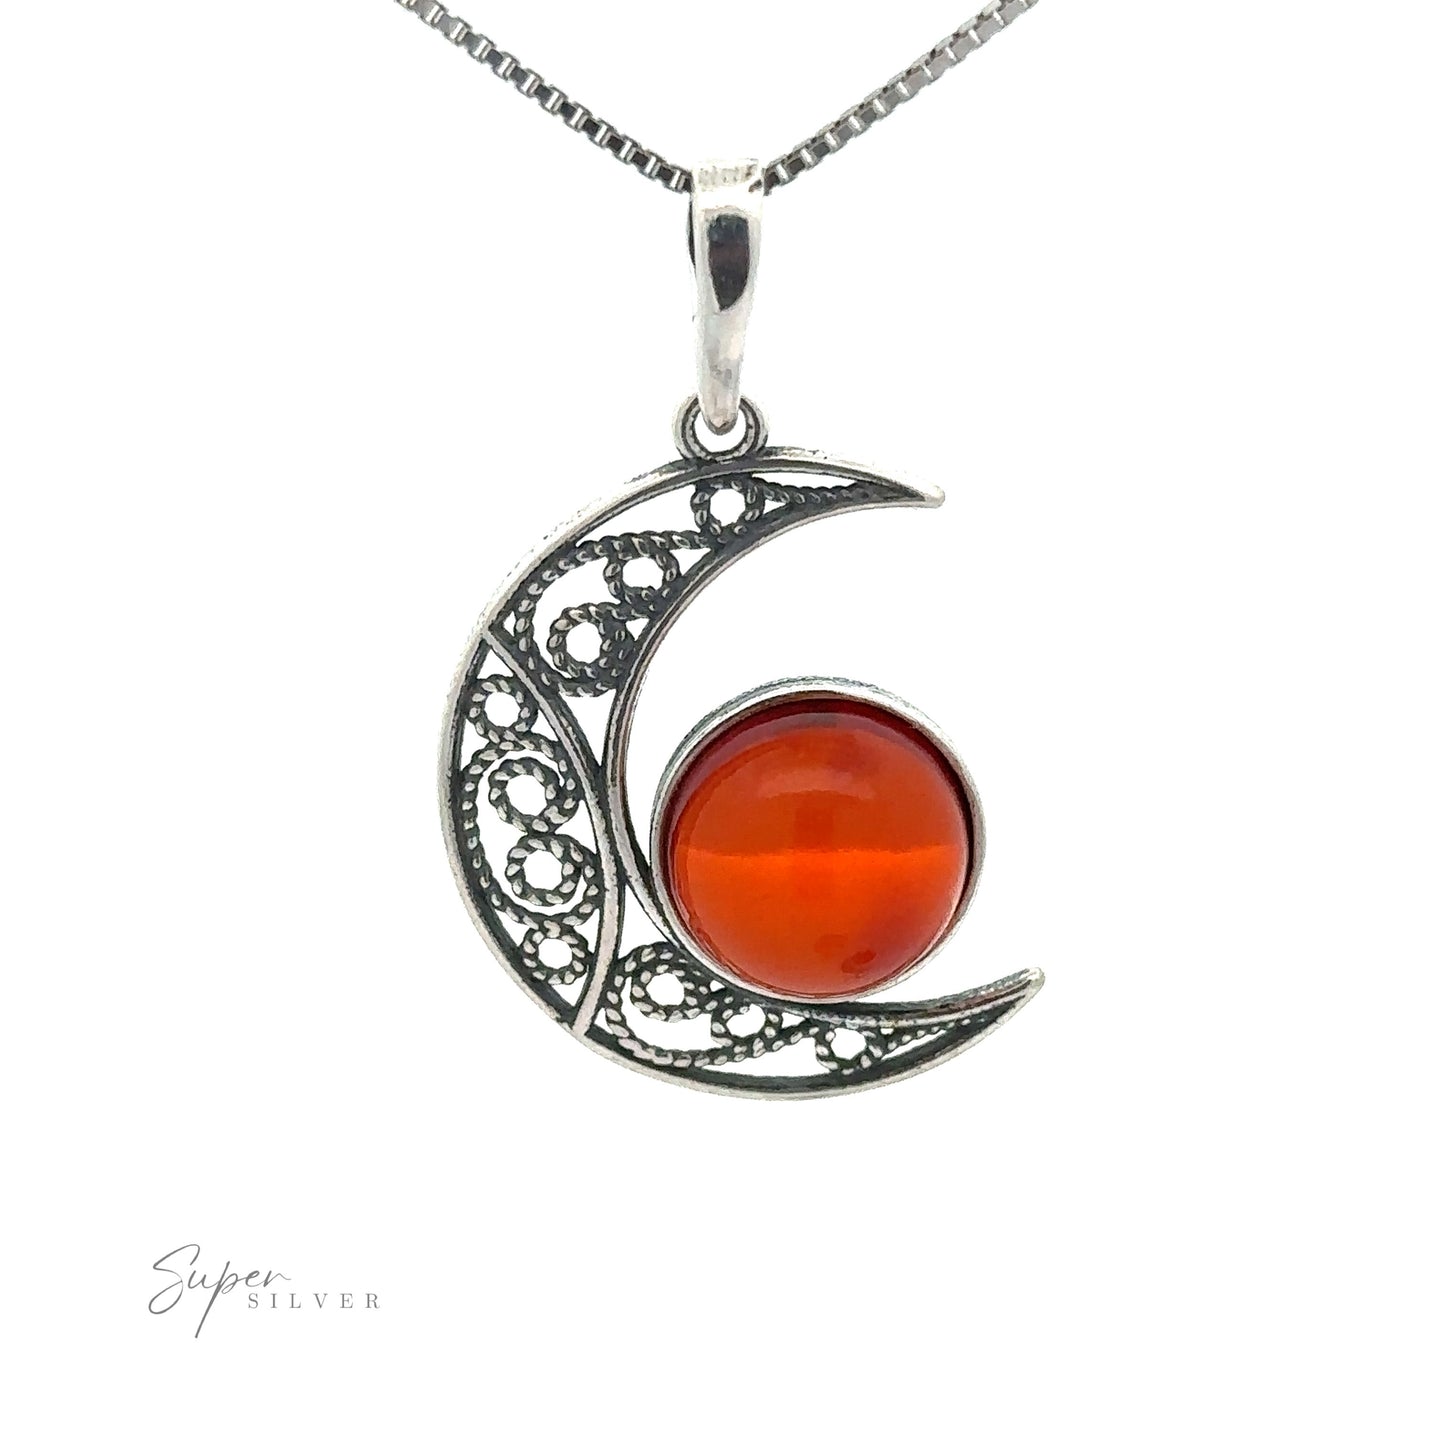 
                  
                    A Baltic Amber Moon Pendant features a crescent moon shape with an intricate design and a red gemstone in the center. Branding text "Super Silver" is visible in the lower left corner, adding to the charm of this exquisite piece.
                  
                